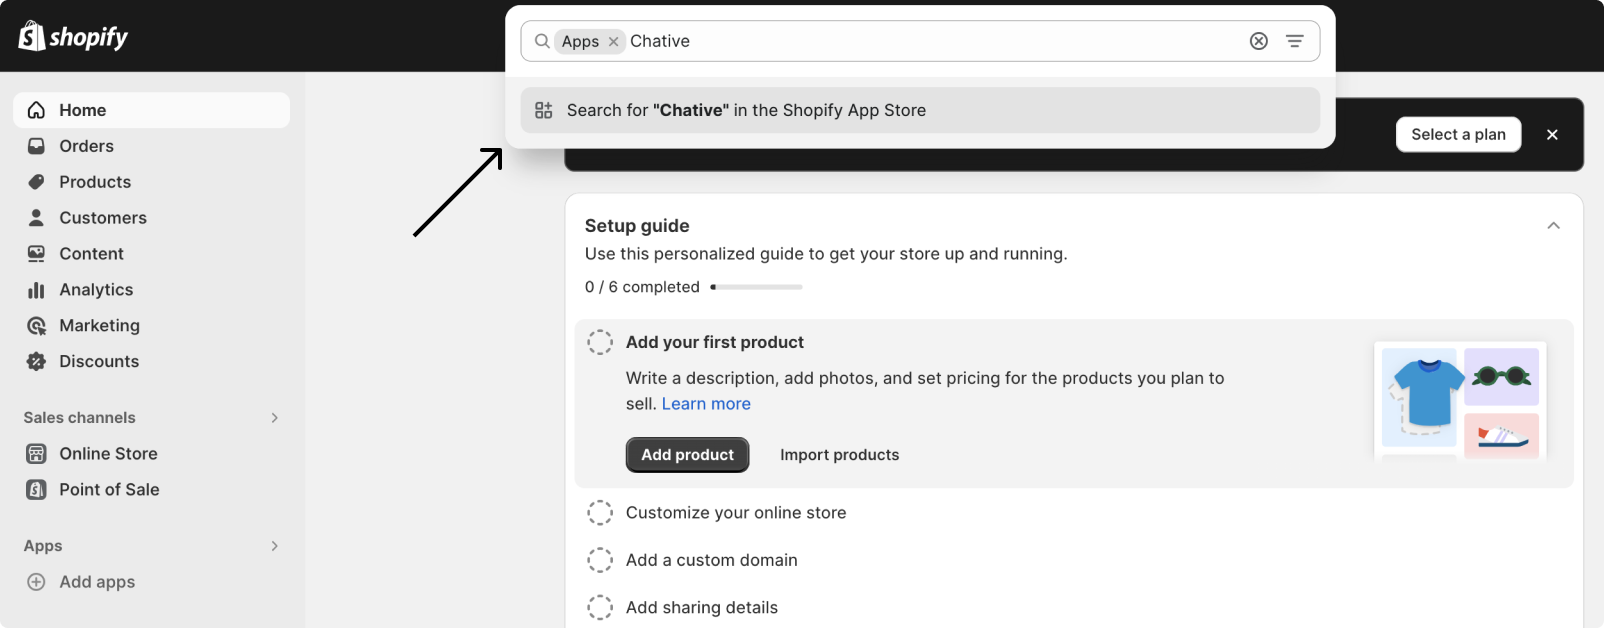 Search for Chative in the Shopify App Store